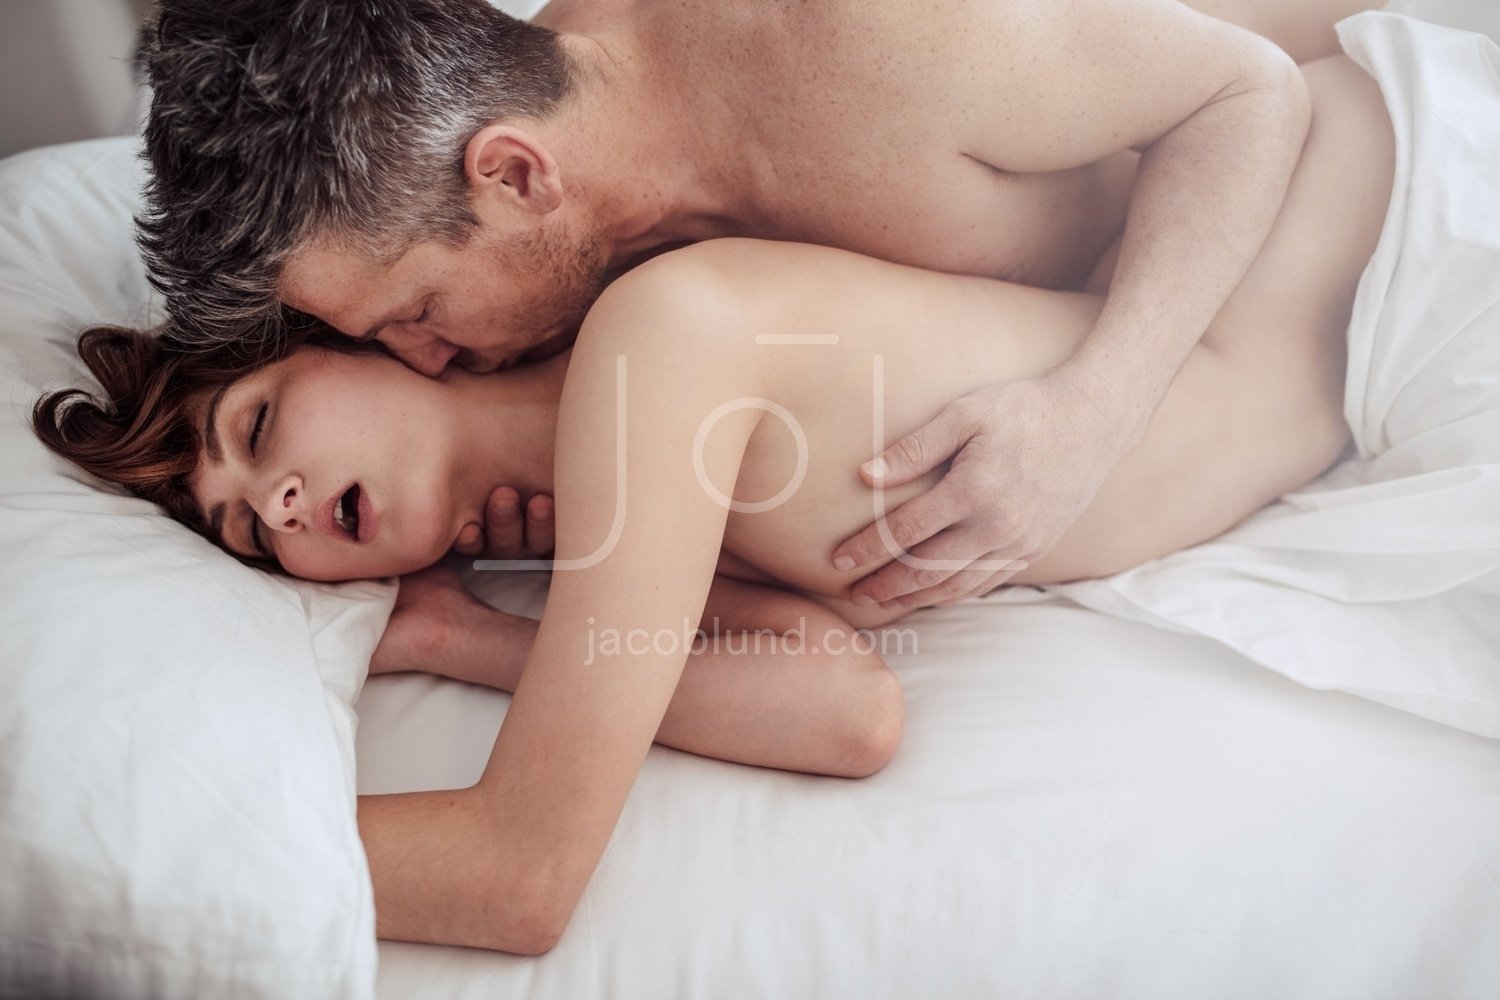 Man and woman in bed having intimate picture